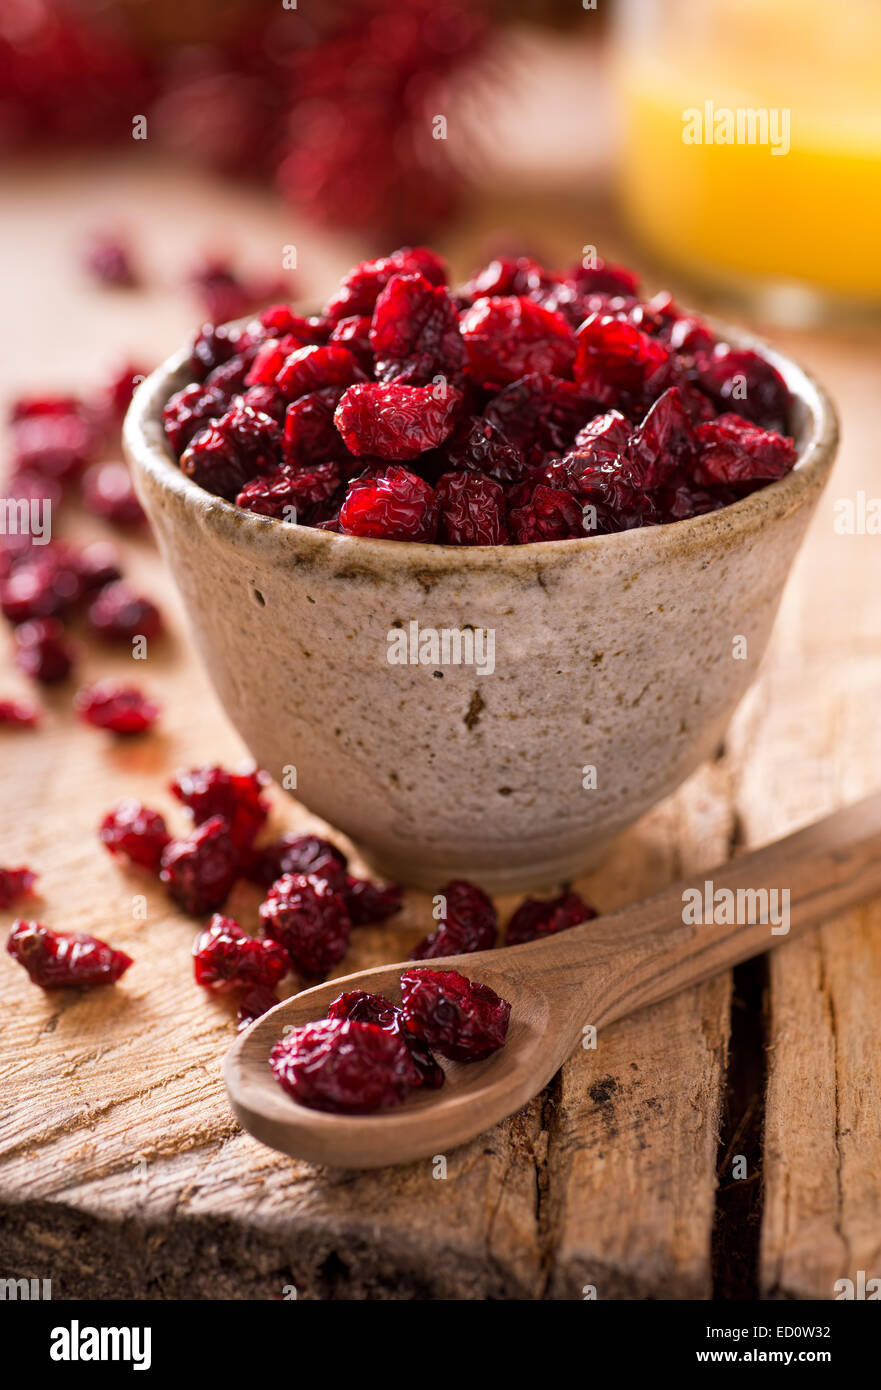 A bowl of delicious tart and sweet dried cranberries. Stock Photo